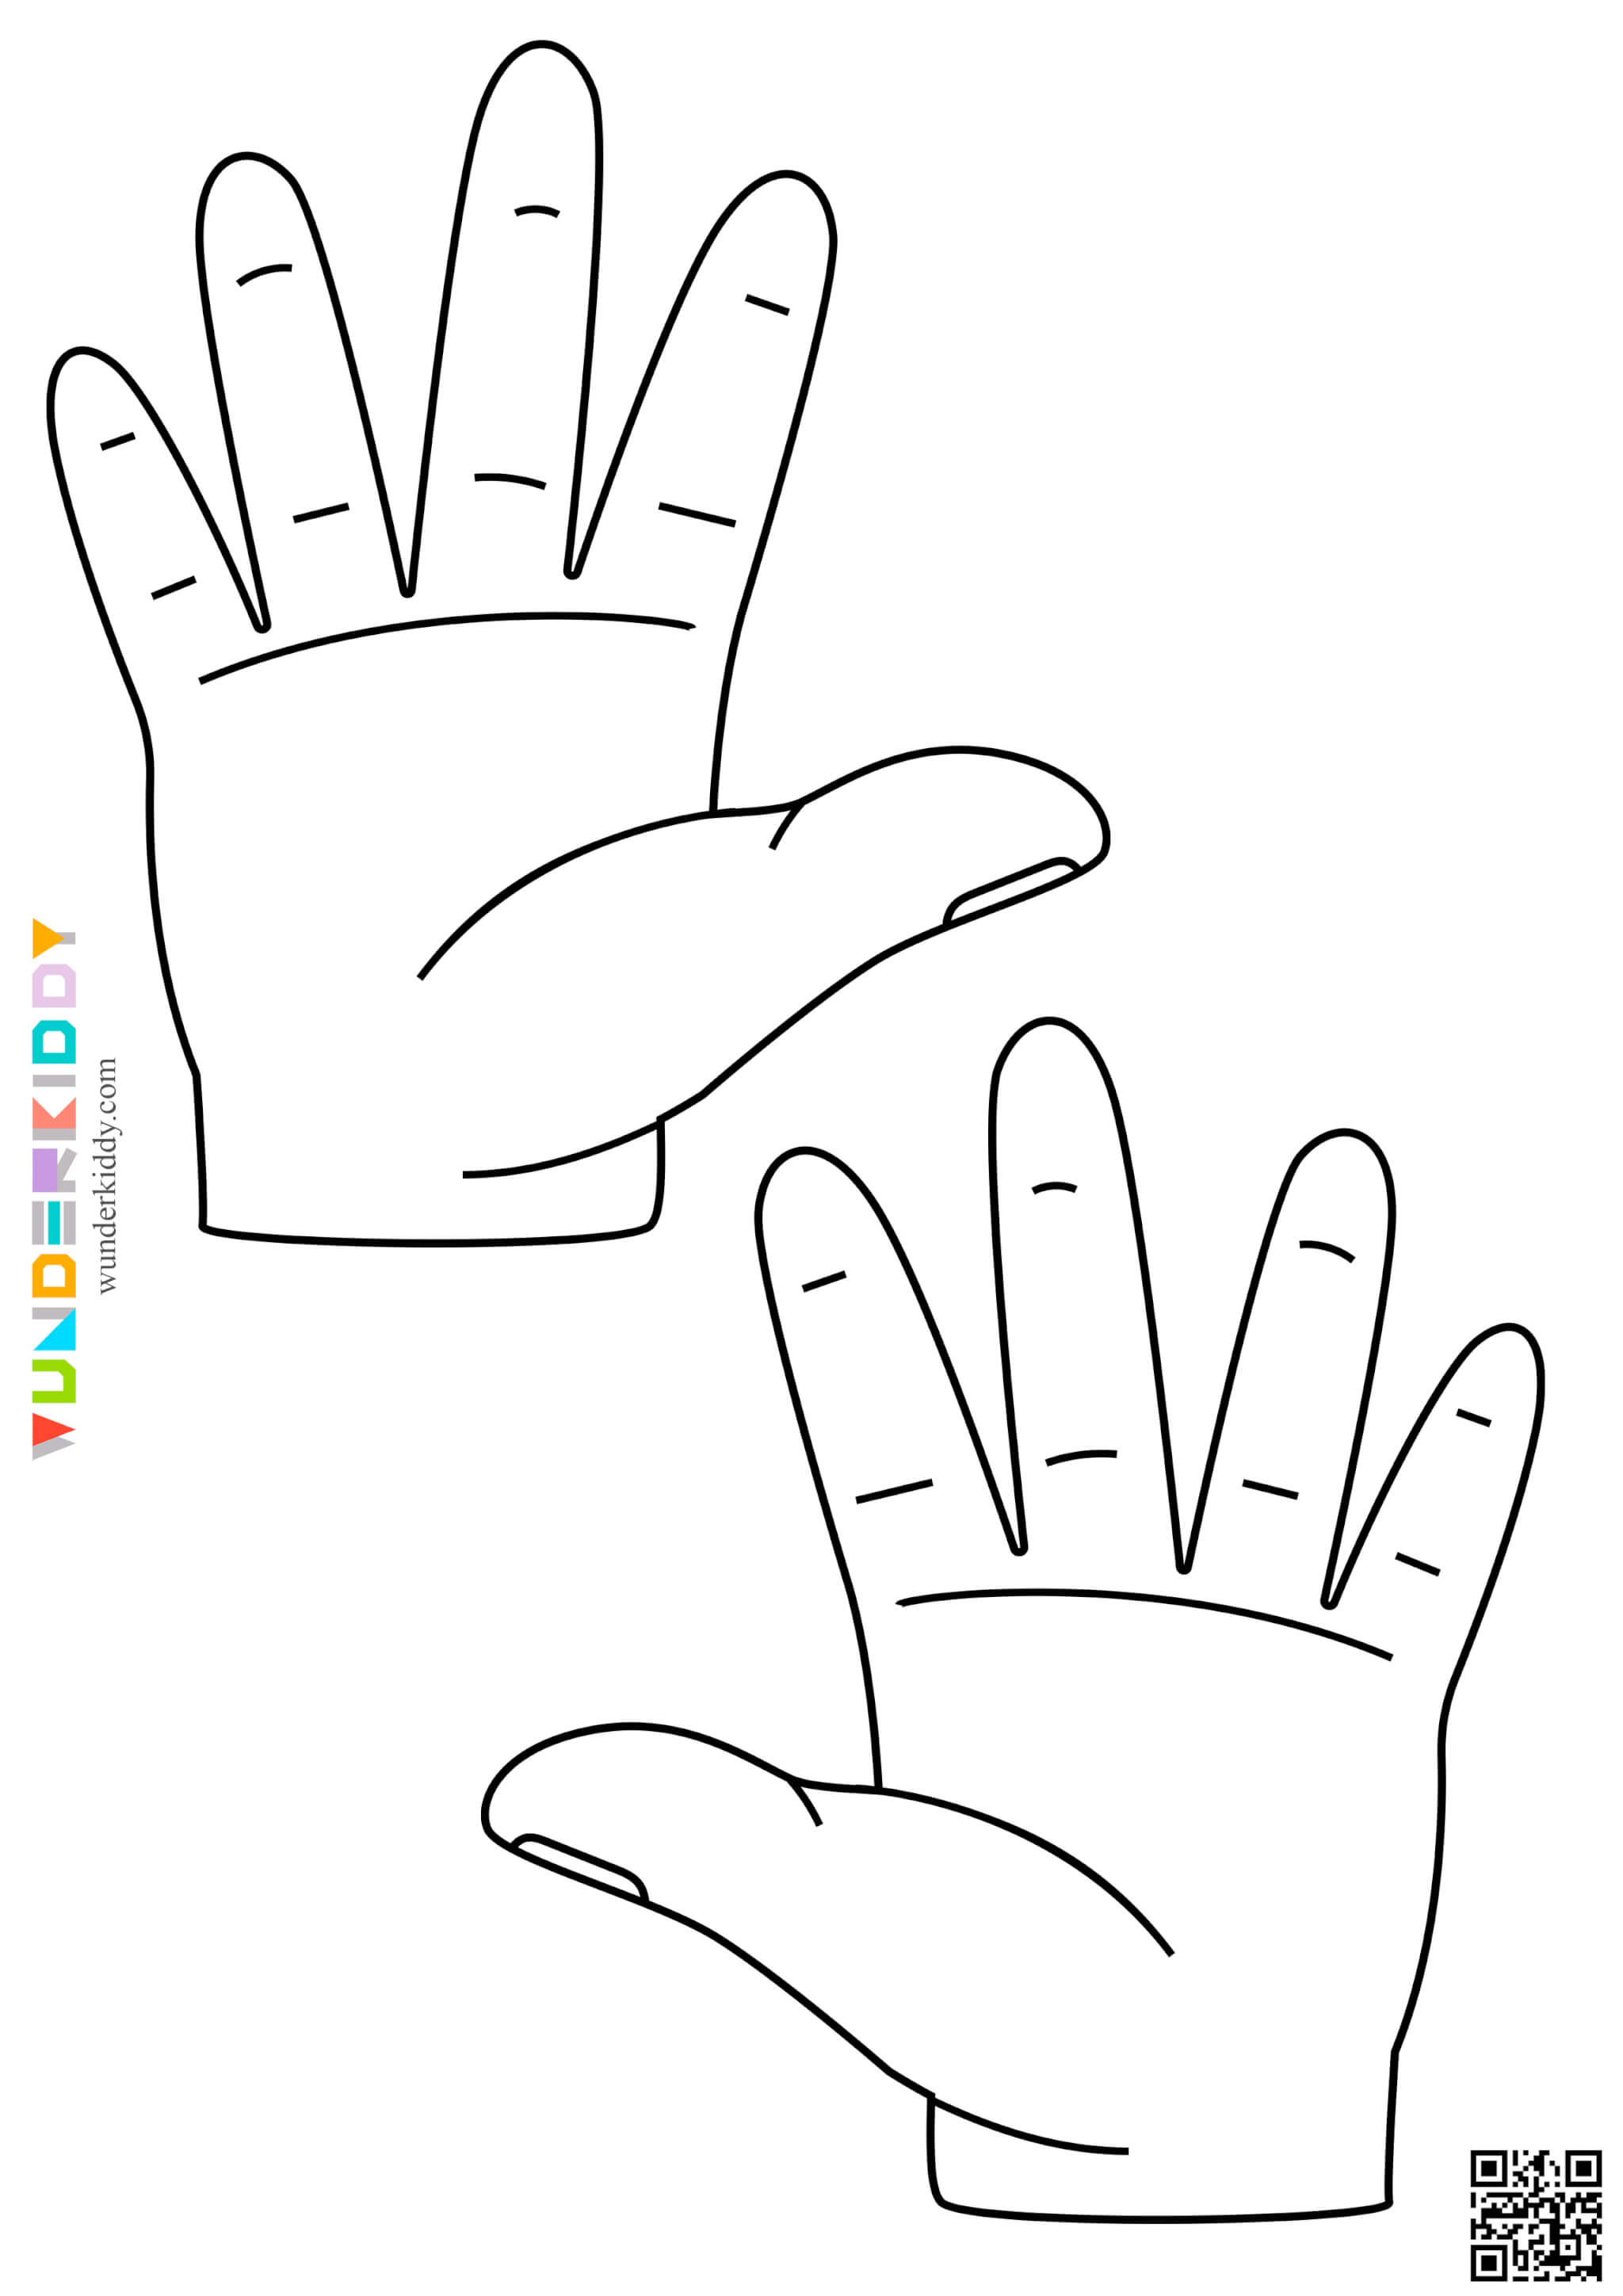 Printable Hands Template - Image 14